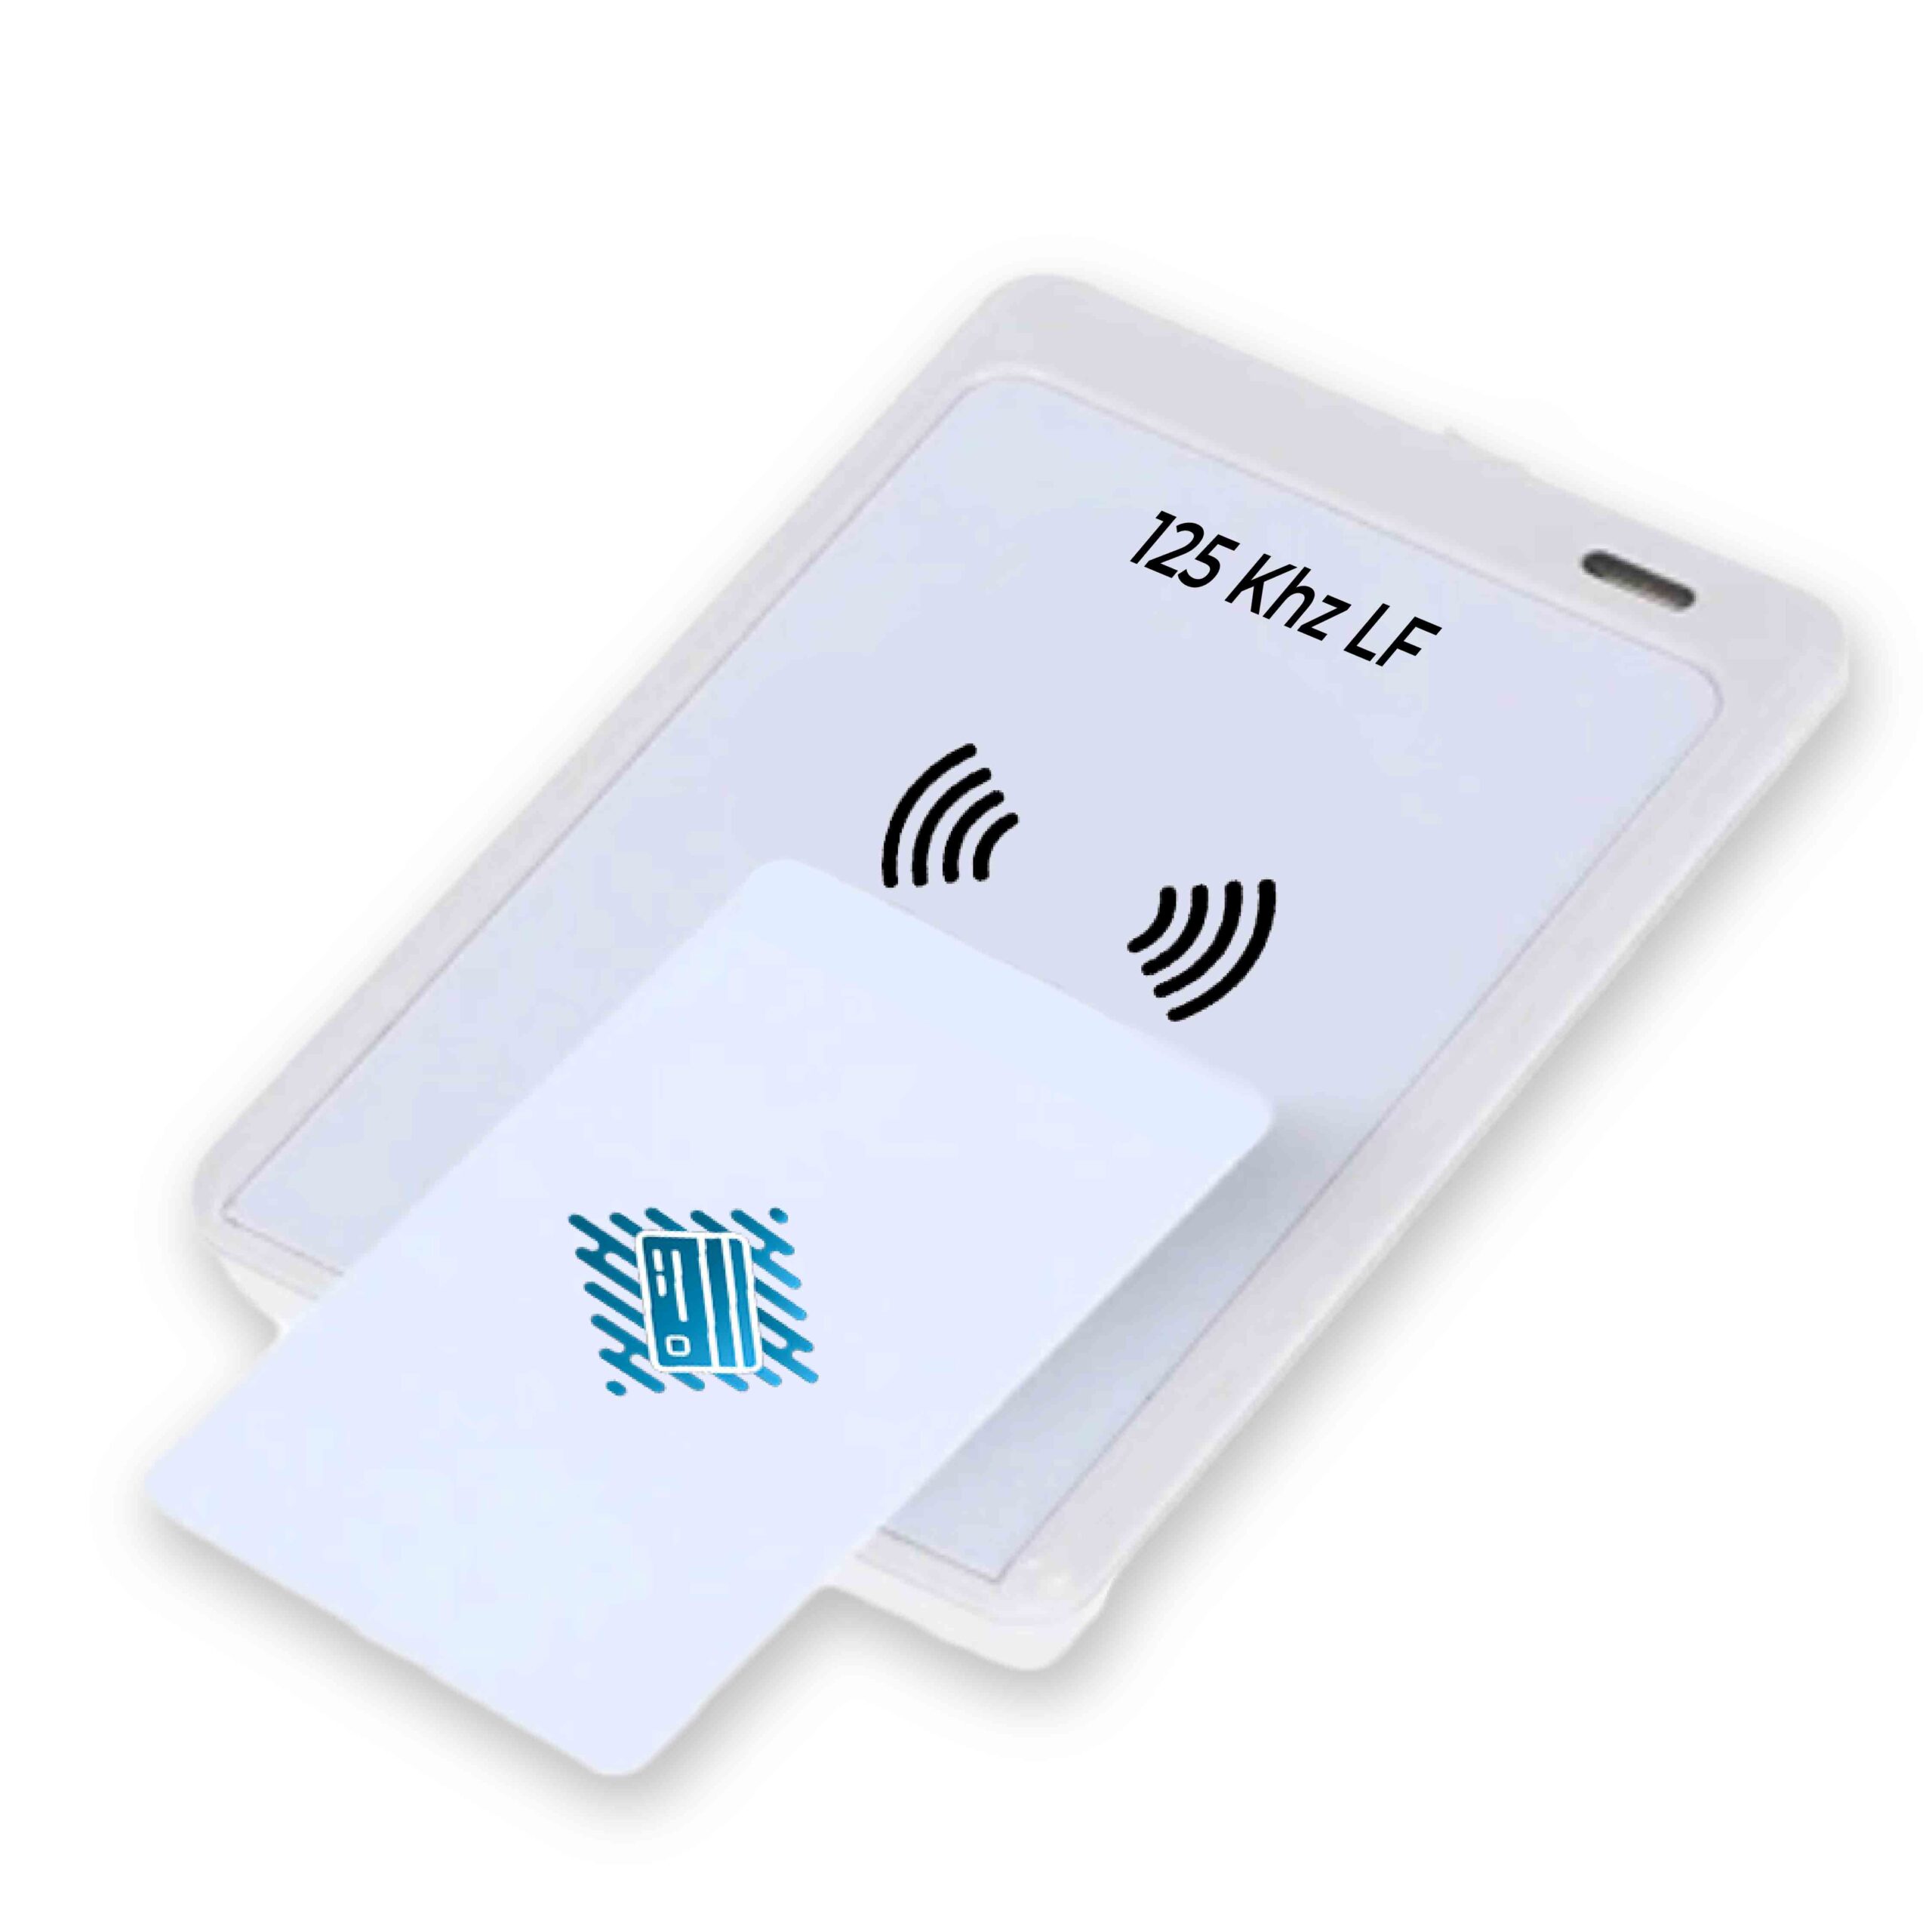 Lettore rfid 125- Cardnology